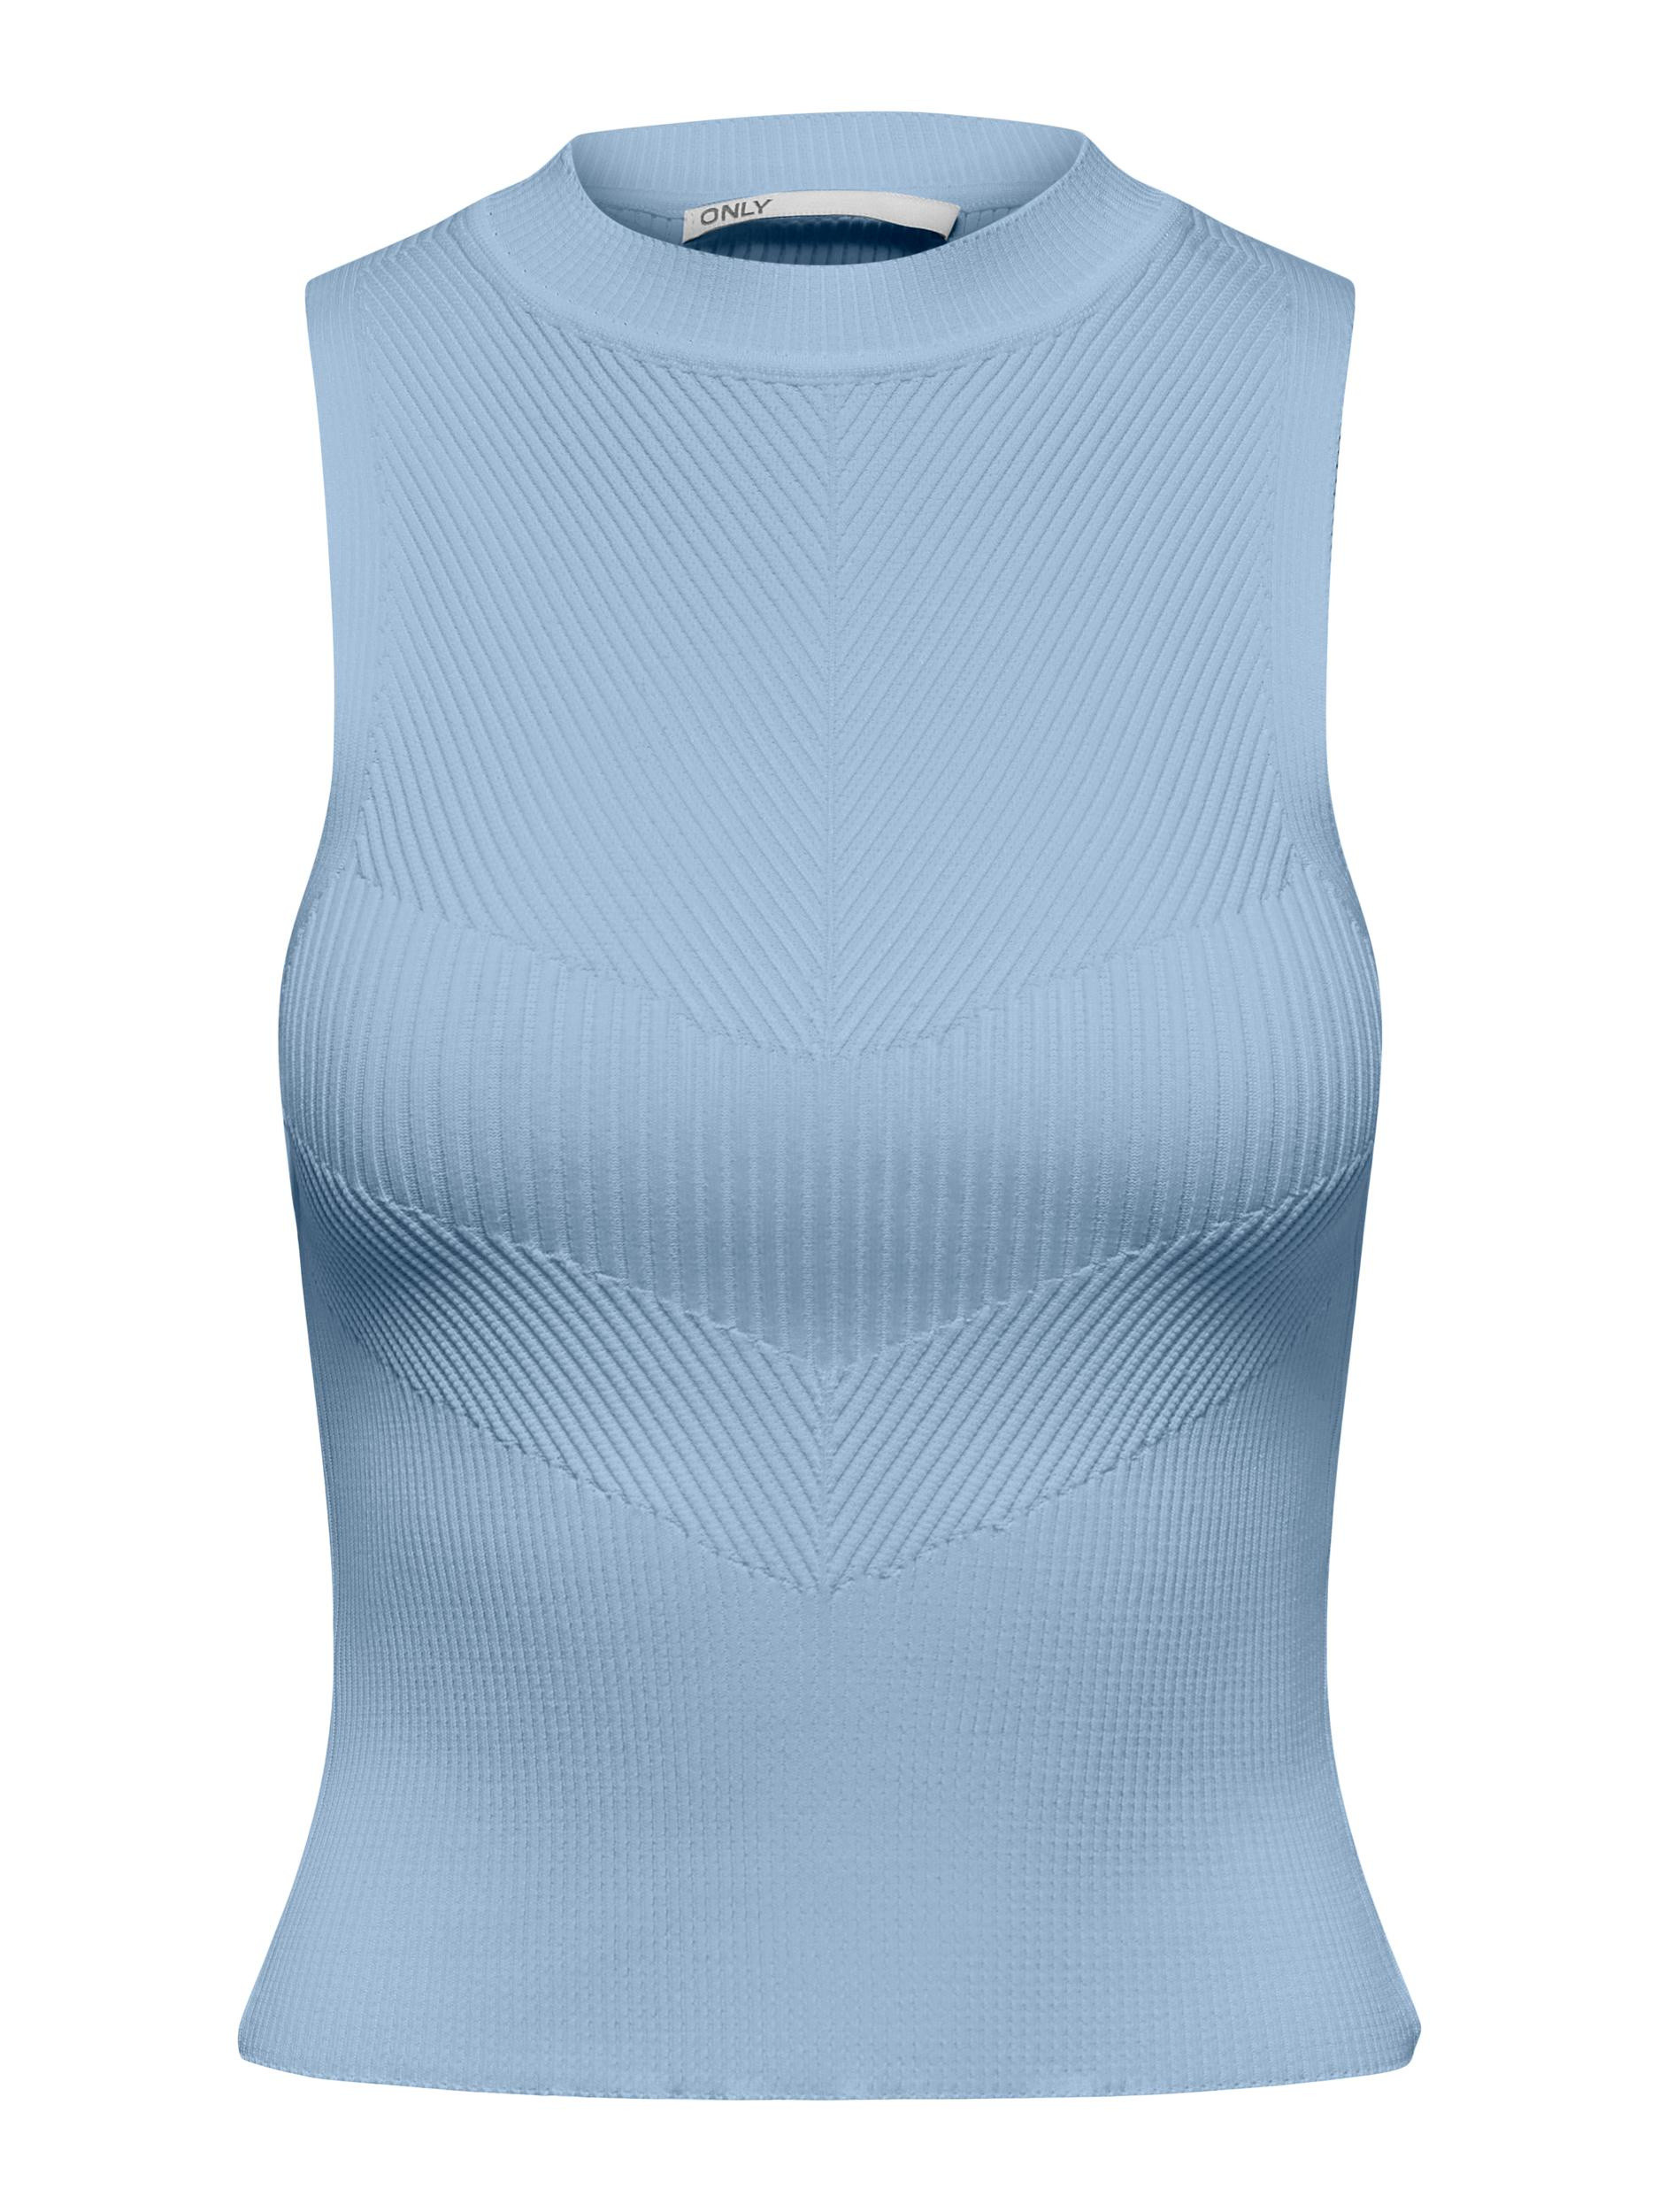 Only - Knitted top, Light Blue, large image number 0